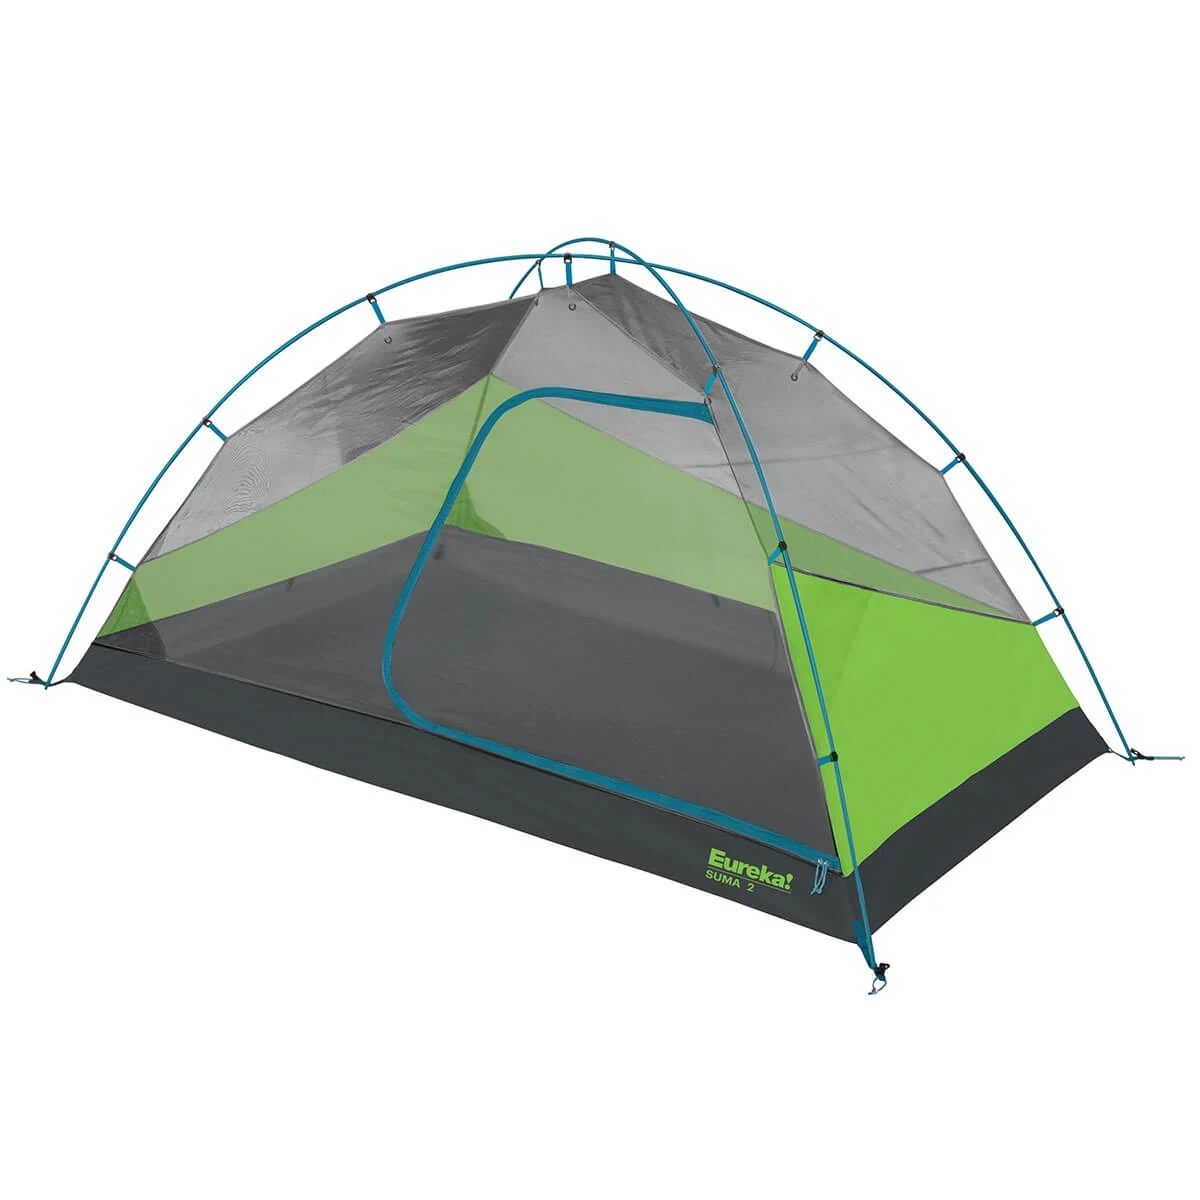 Suma 2 person tent without rainfly